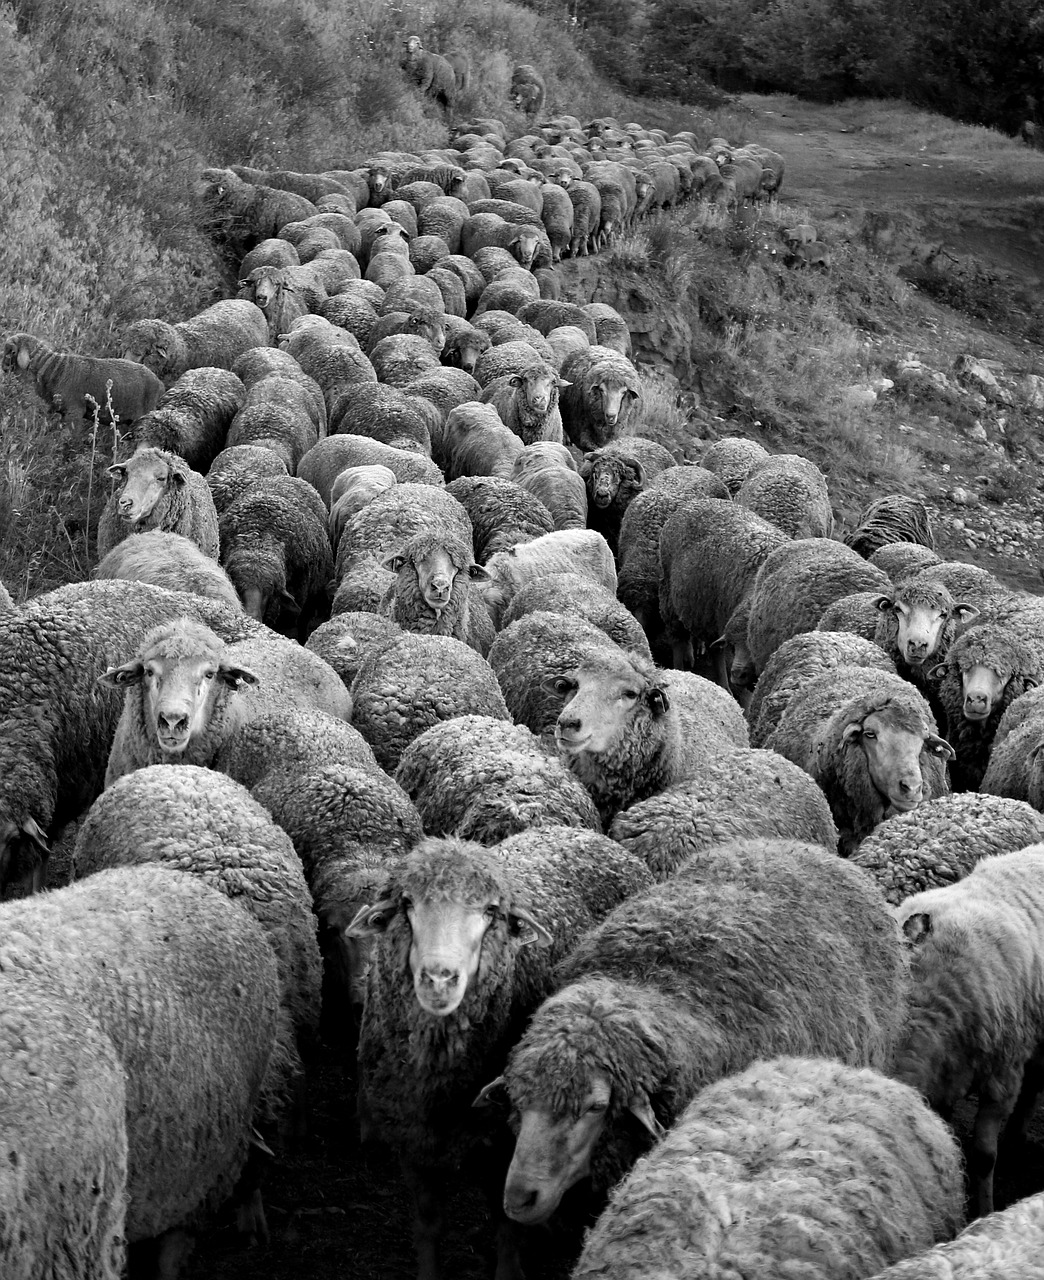 a black and white photo of a herd of sheep, by Mirabello Cavalori, about to step on you, highly realistic”, cult leader, peter palombi